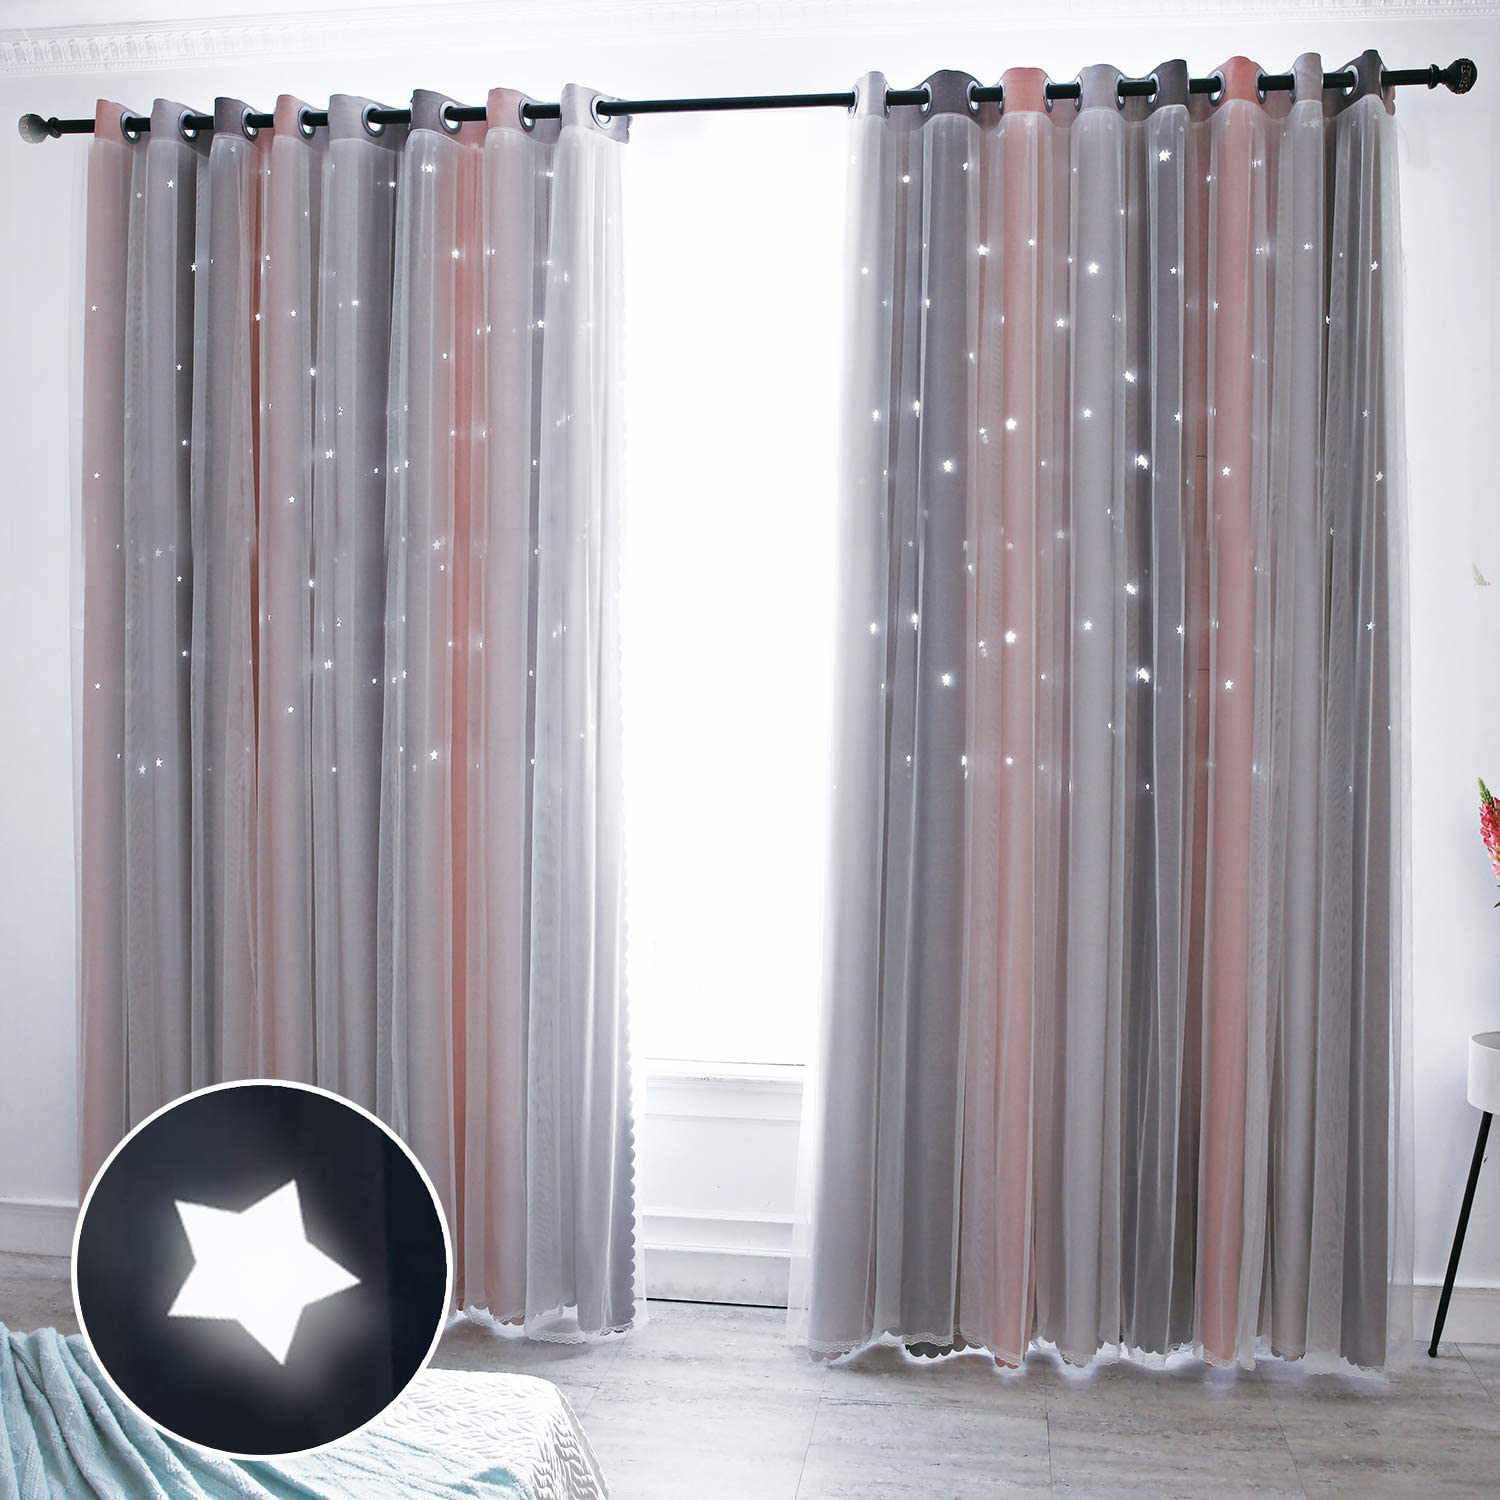 7 Best Blackout Curtains Of 2020 According To Reviews Real Simple,Almirah Modern Wardrobe With Dressing Table Designs For Bedroom Indian